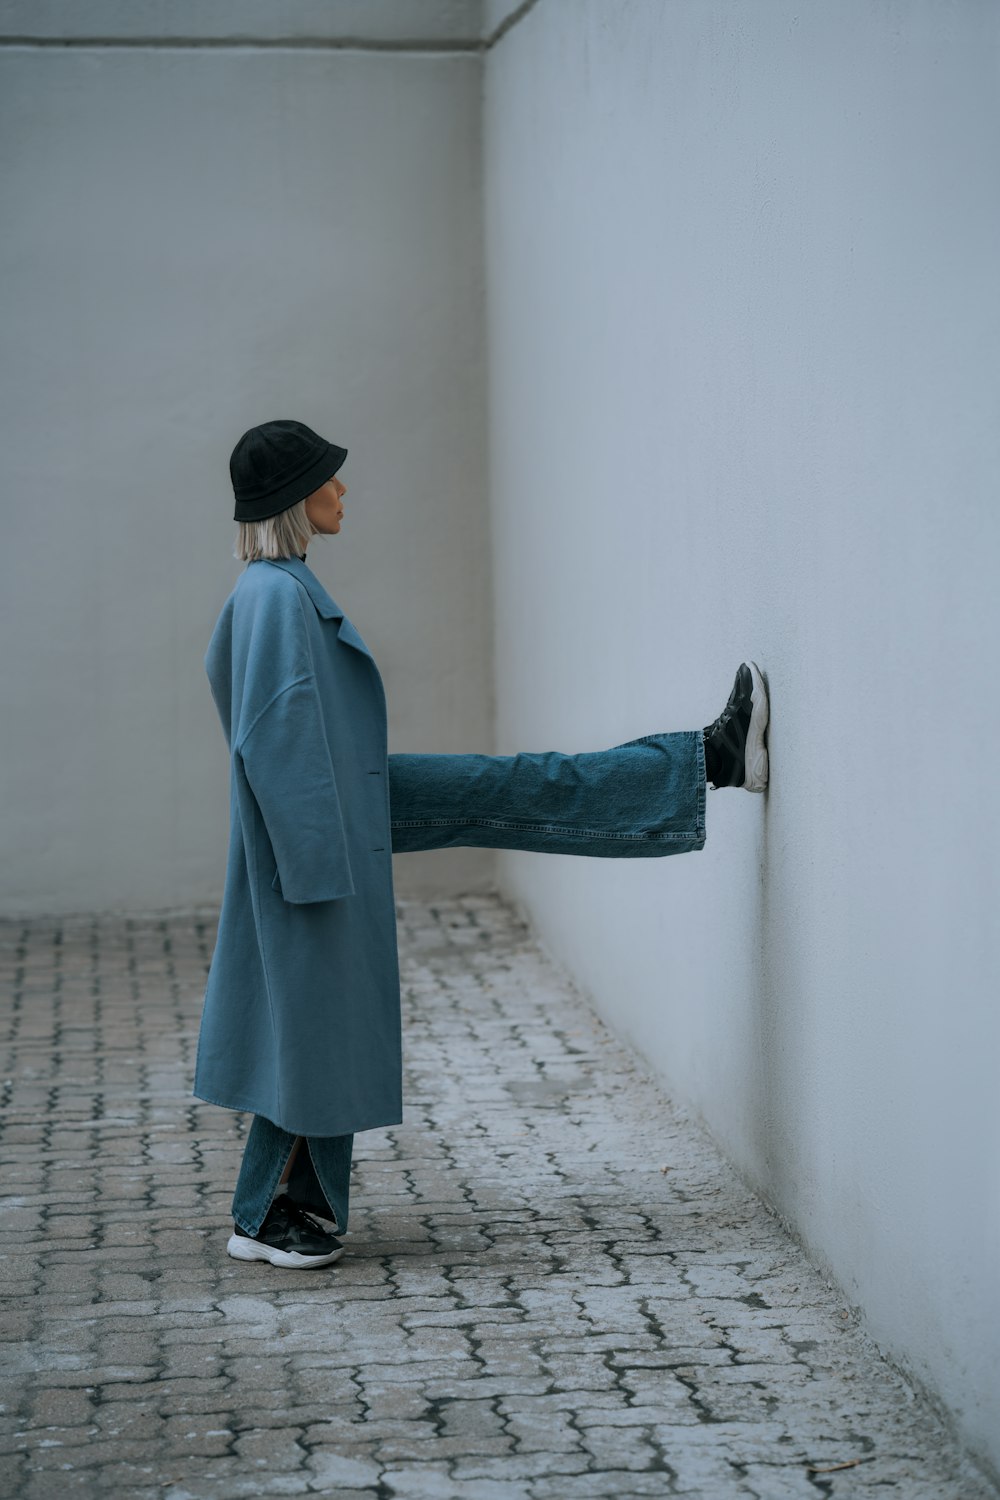 a person leaning against a wall with their foot on a wall